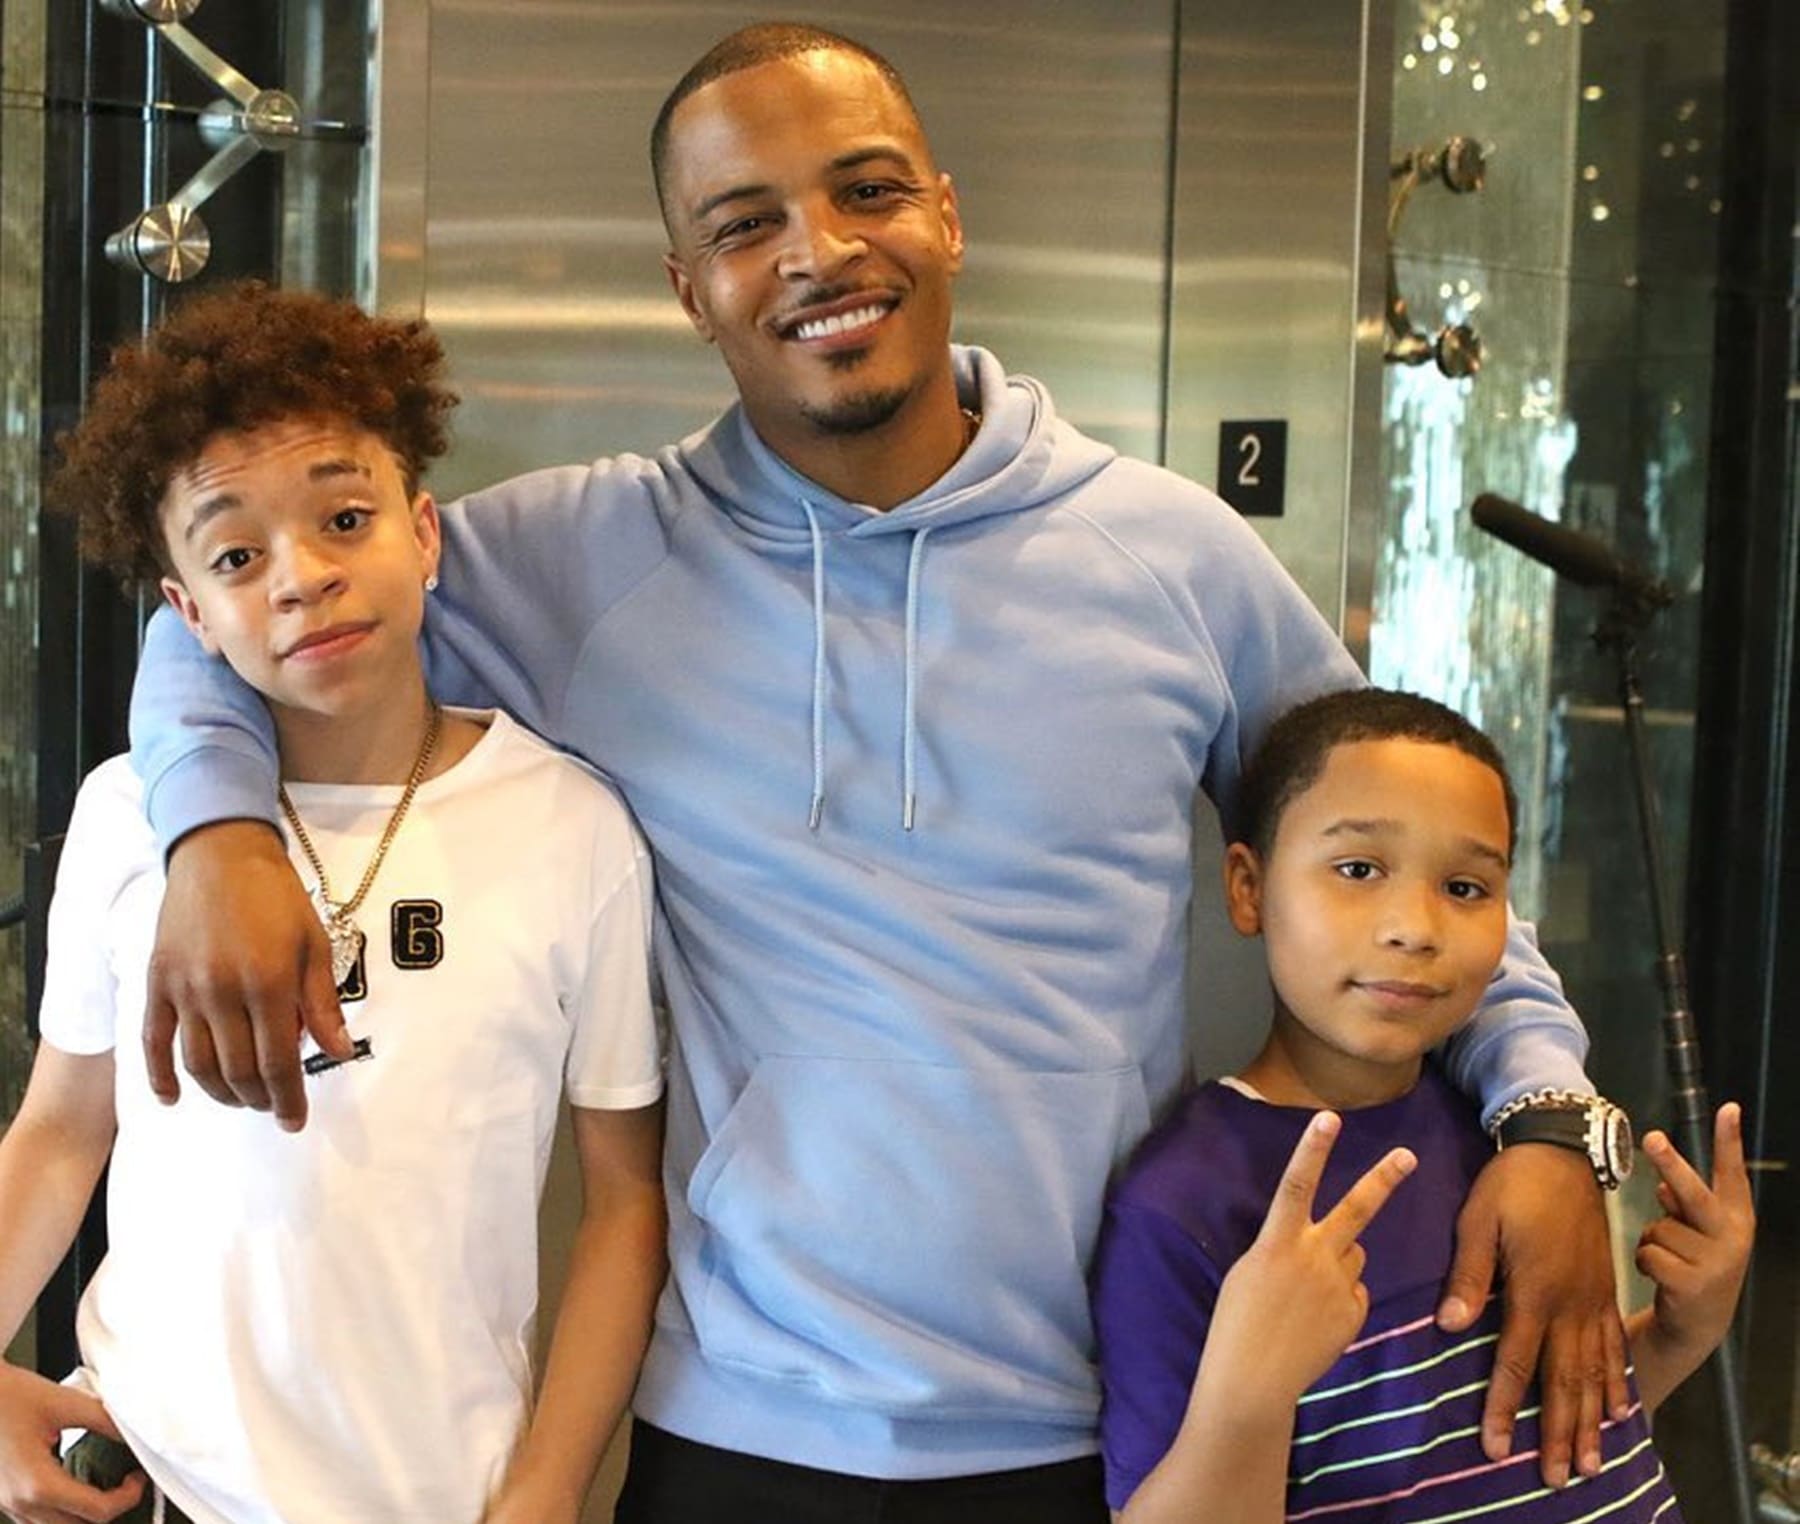 T.I. Praises His Son, King Harris - See The Message About His Talented Son